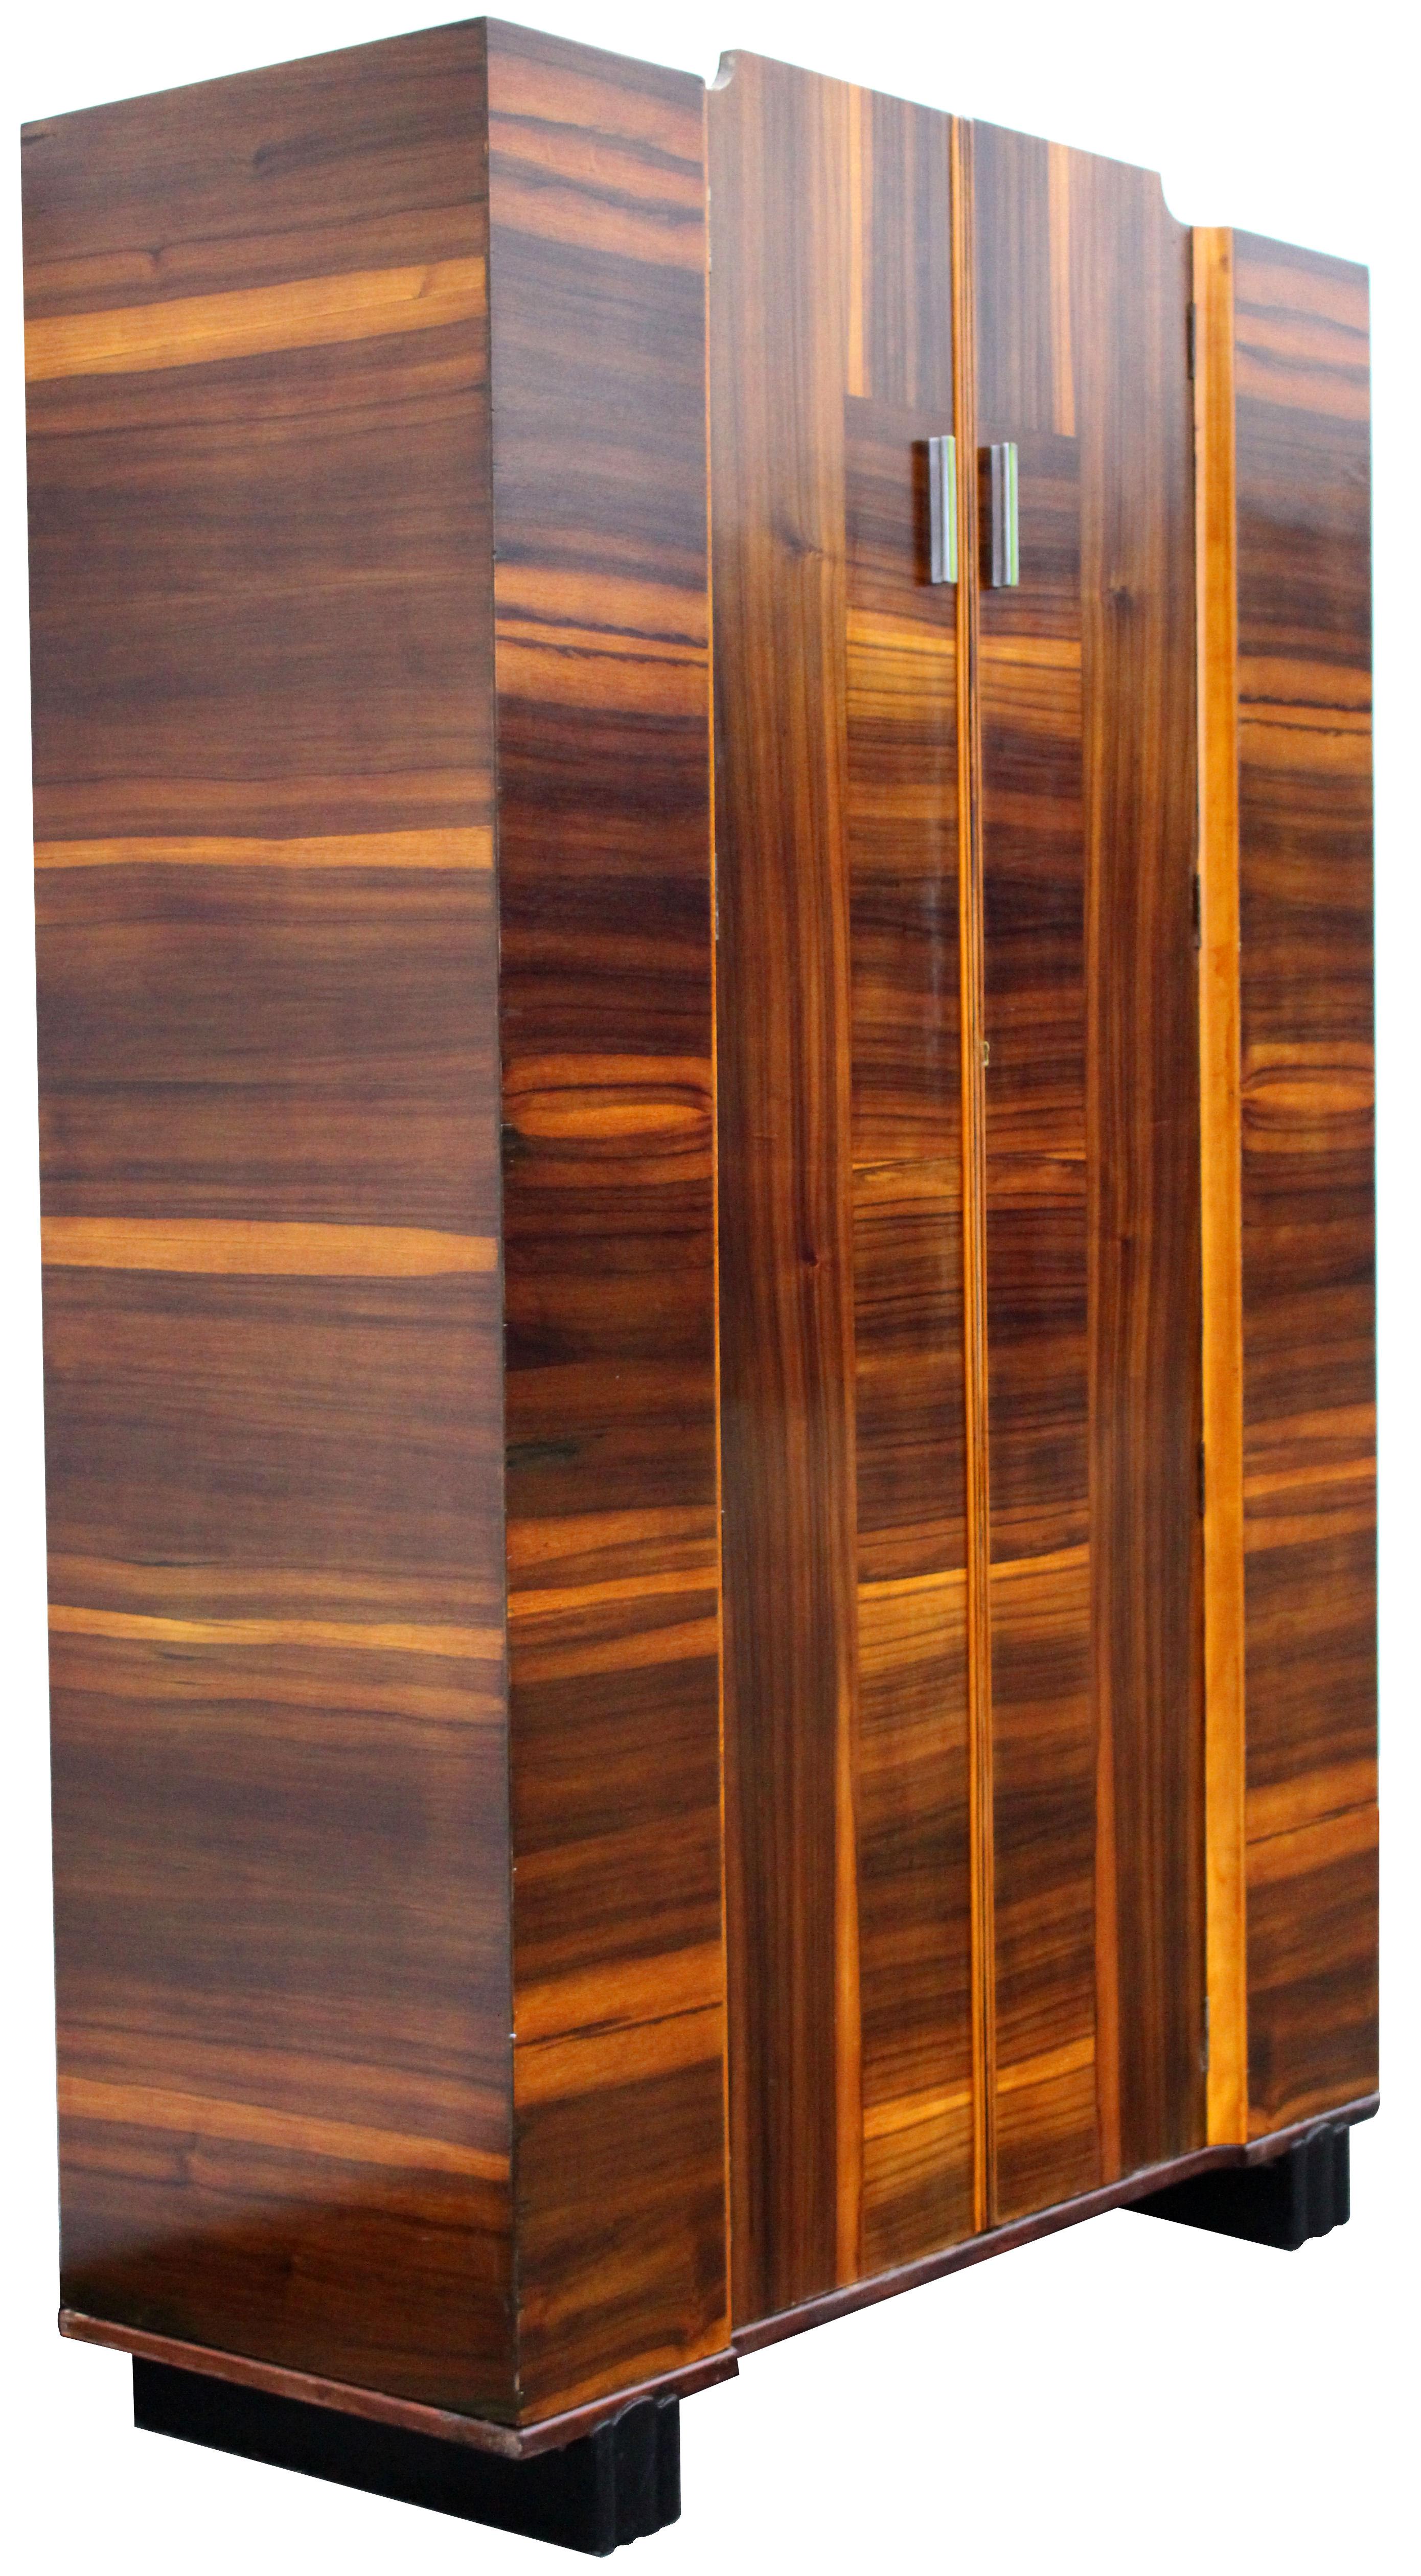 For your consideration is this very striking and imposing Art Deco double wardrobe with a modernist slant. The veneers are wonderful offering light and dark tones. This stand alone wardrobe would fit perfectly in any modern or modernist interior.